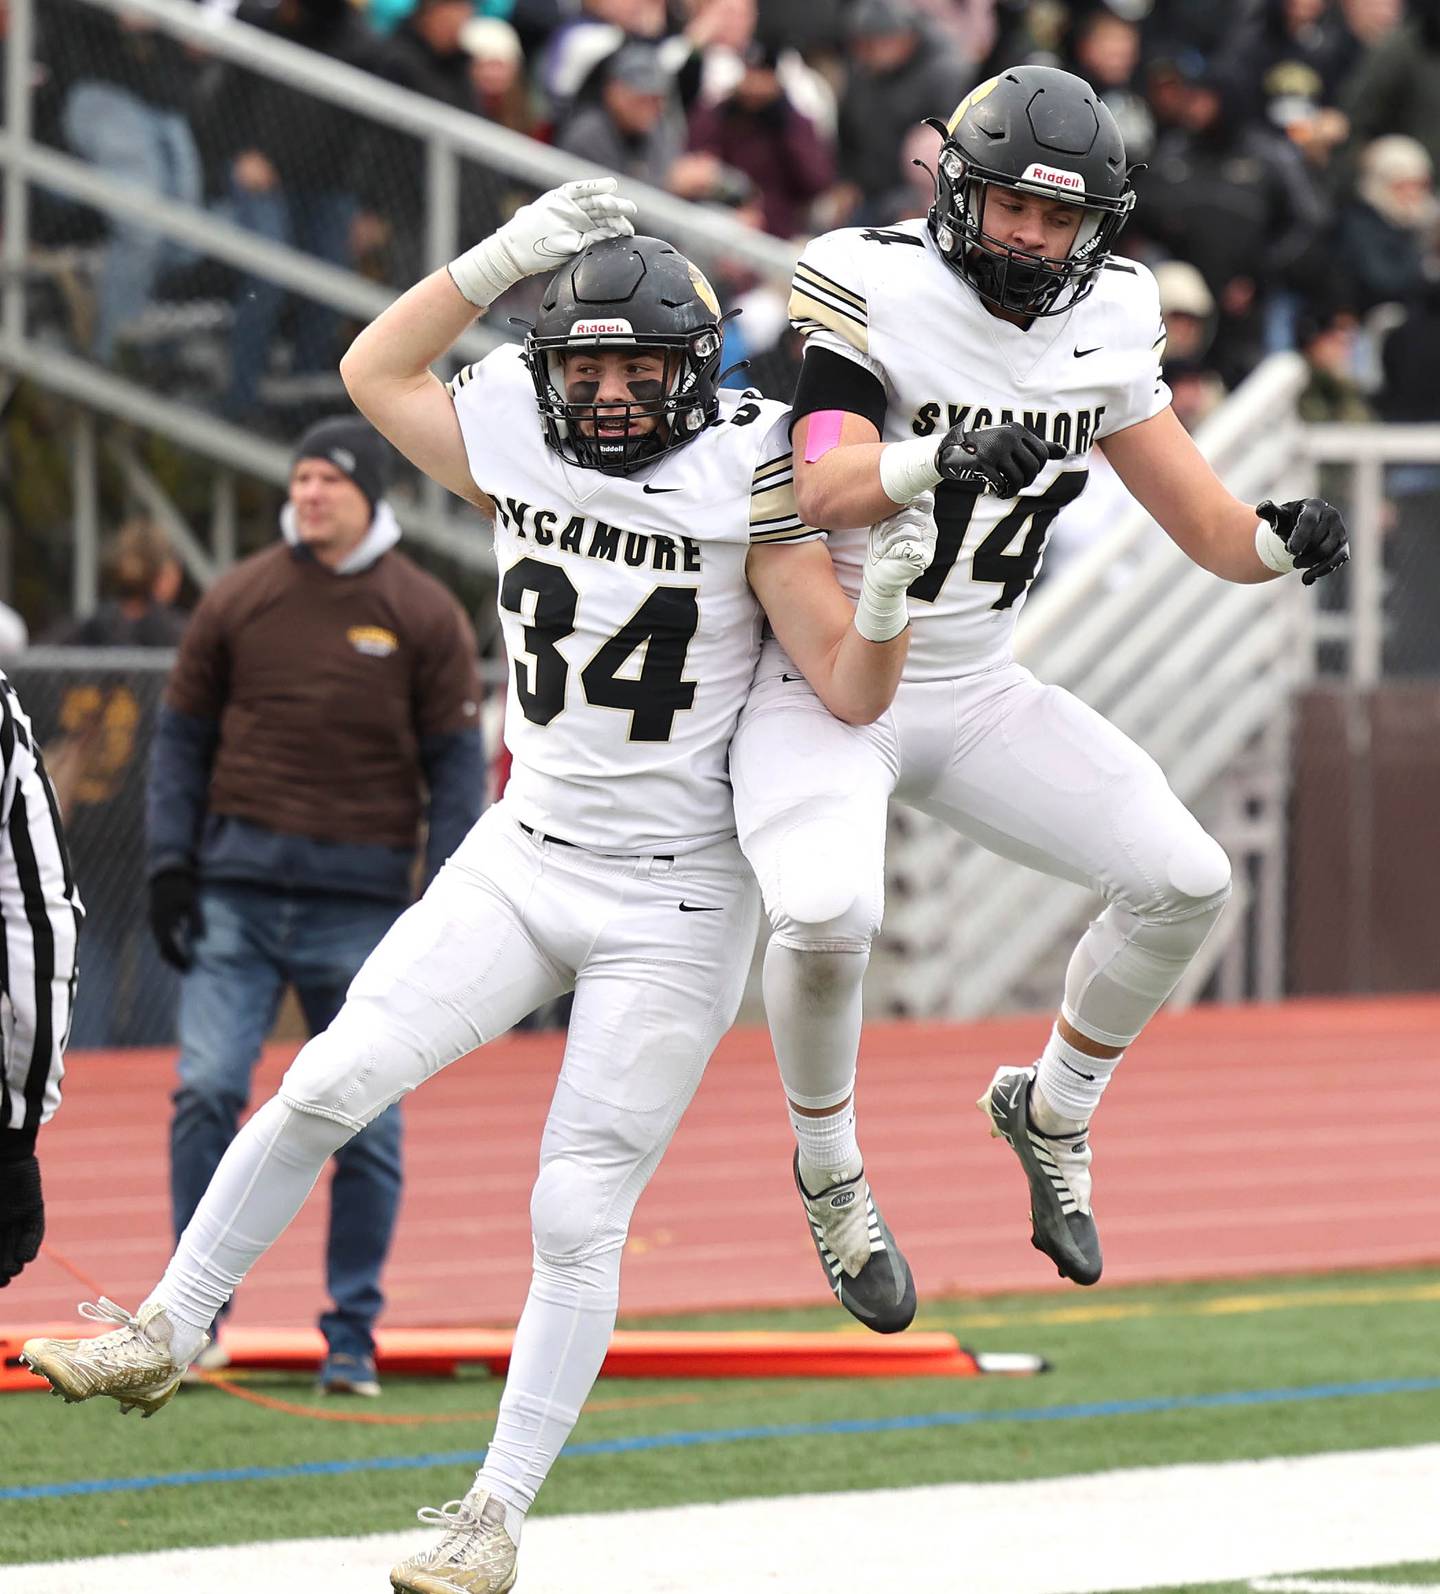 Sycamore's Joey Puleo (left) and Sycamore's Kiefer Tarnoki celebrate Puleo’s touchdown during their Class 5A second round playoff game against Carmel Saturday, Nov. 5, 2022, at Carmel Catholic High School in Mundelein.